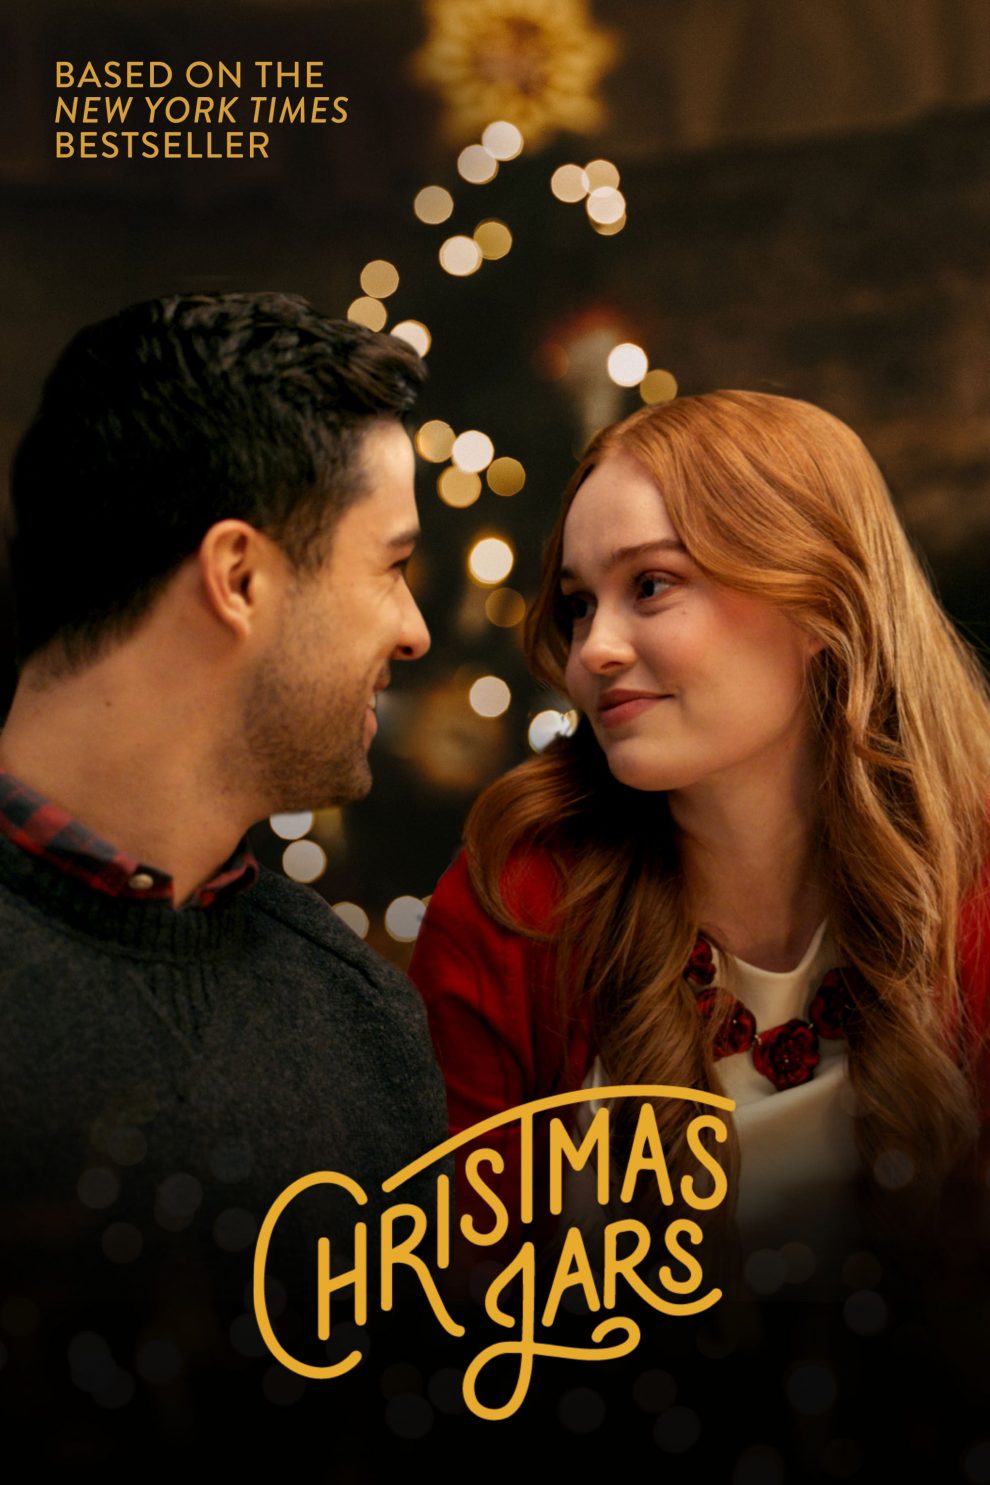 Poster for the movie "Christmas Jars"